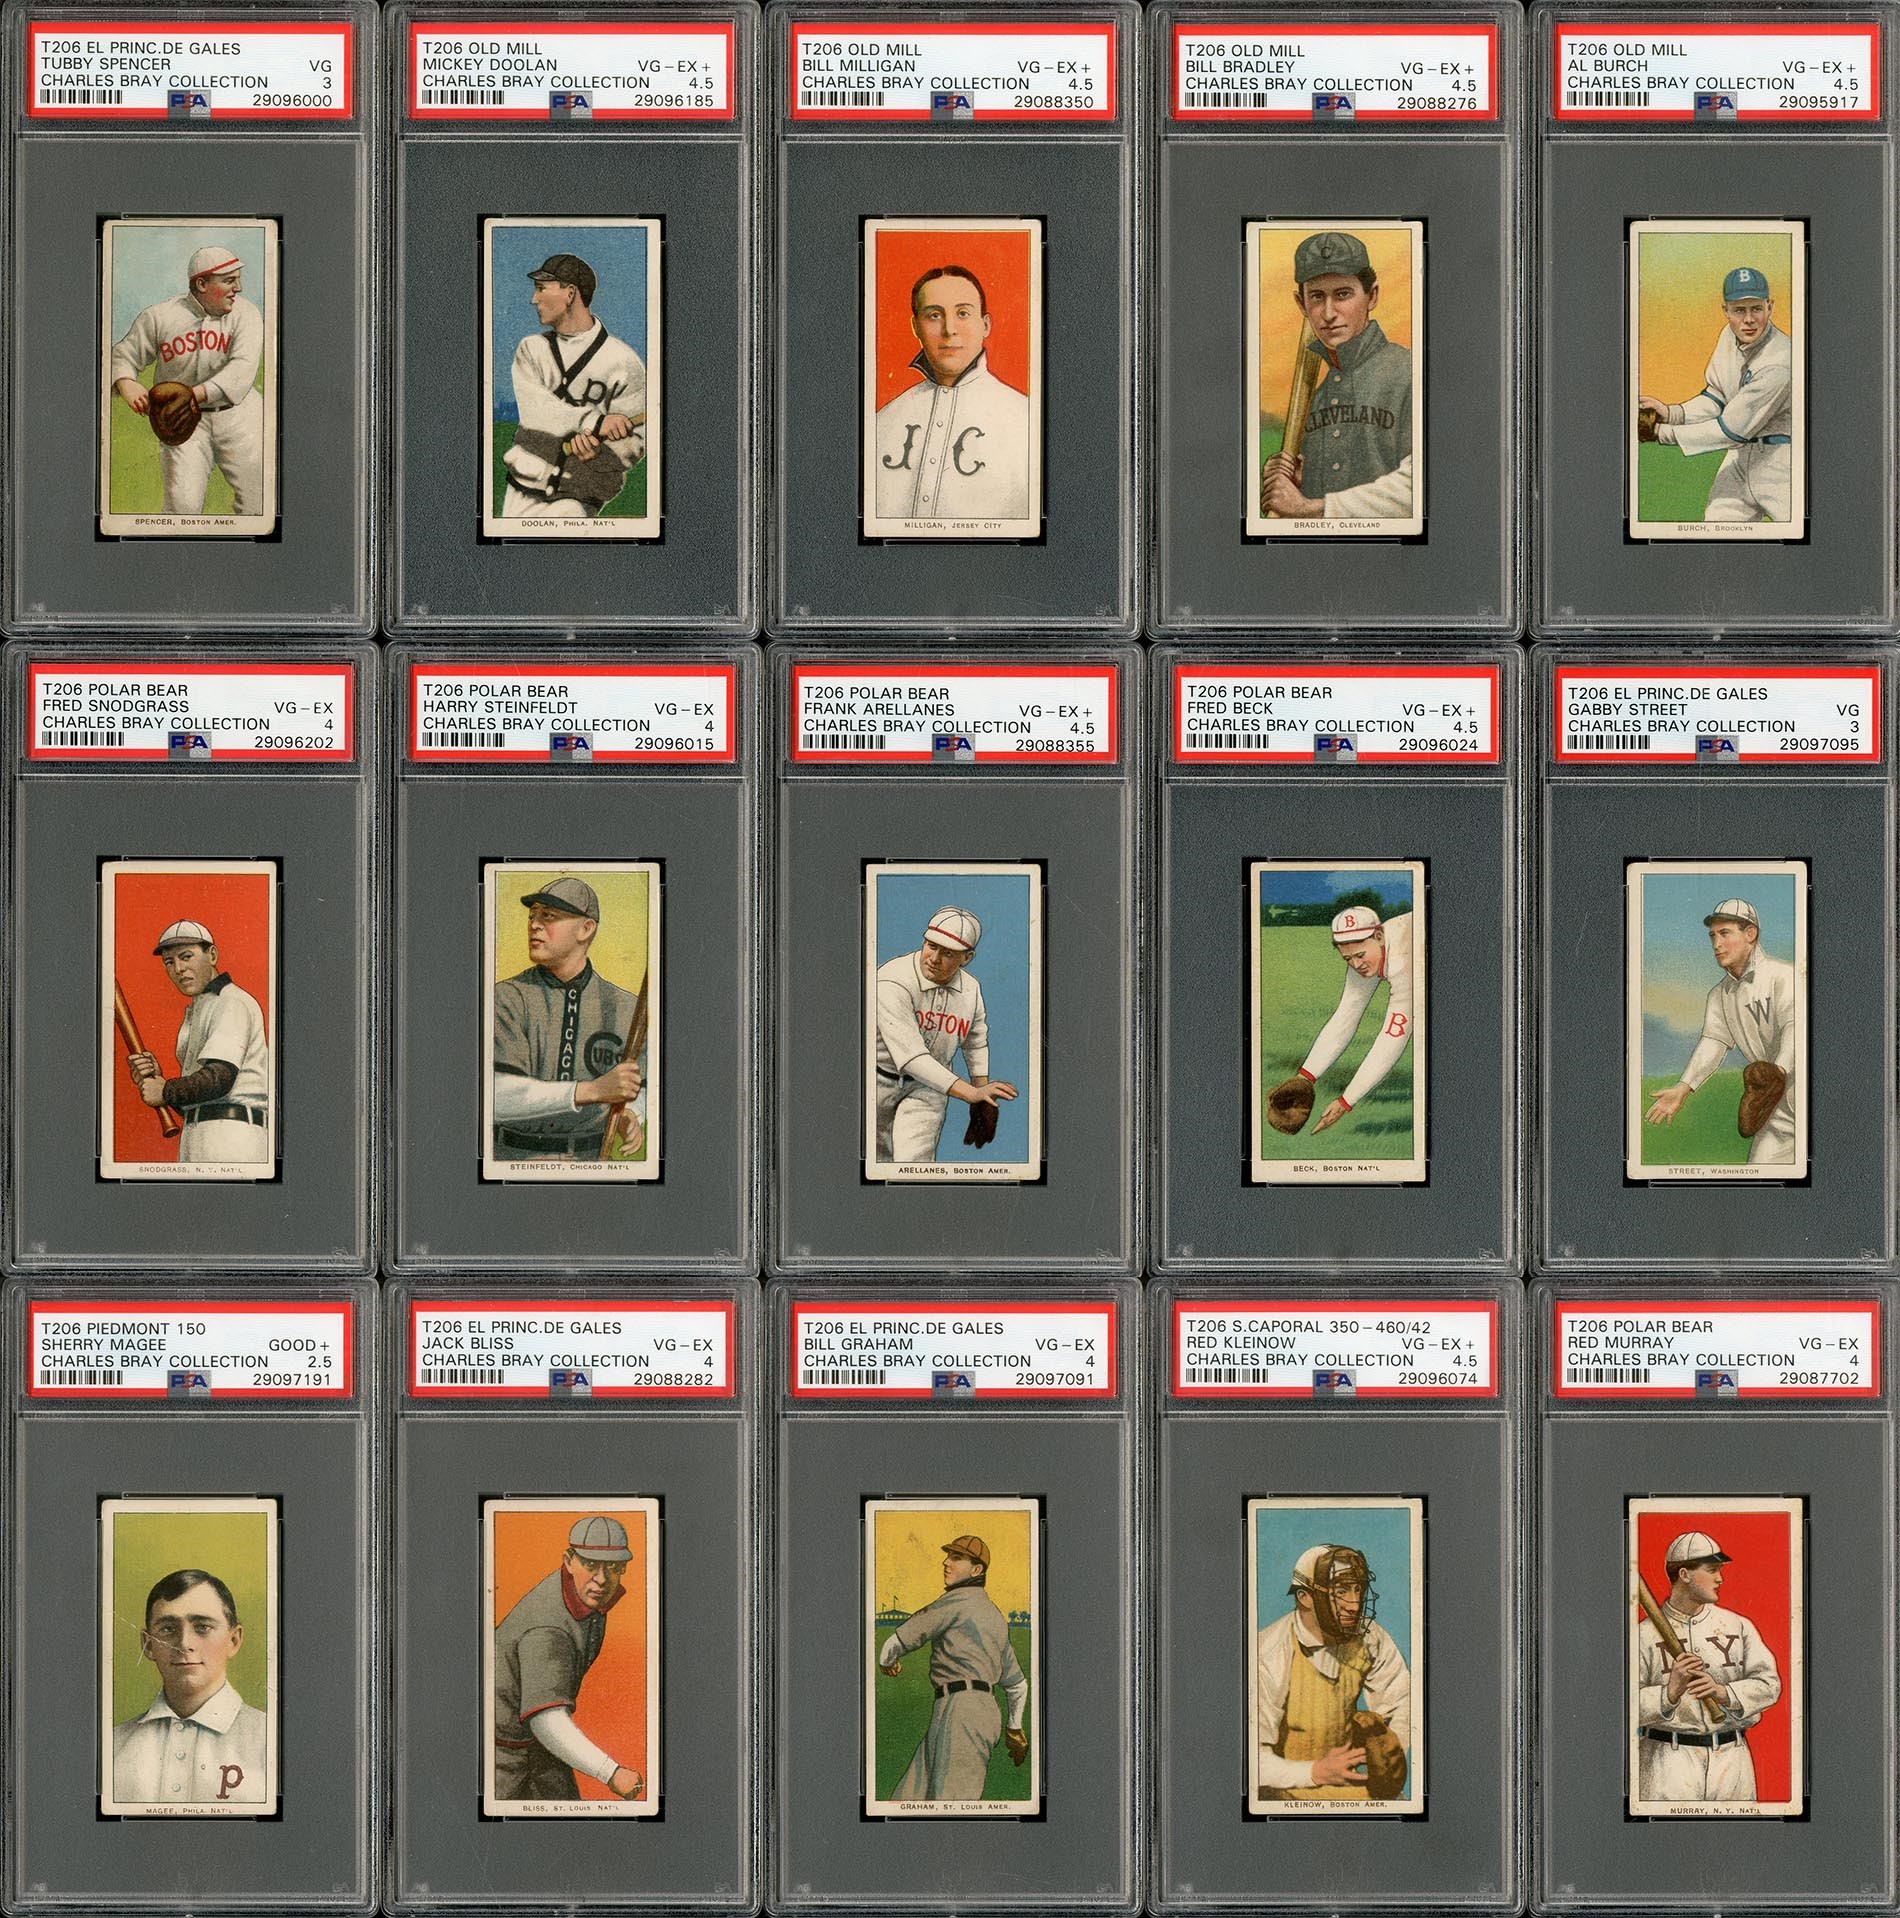 Baseball and Trading Cards - T206 PSA Graded Master Collection w/Rare Backs - The Charles Bray Collection (700+)